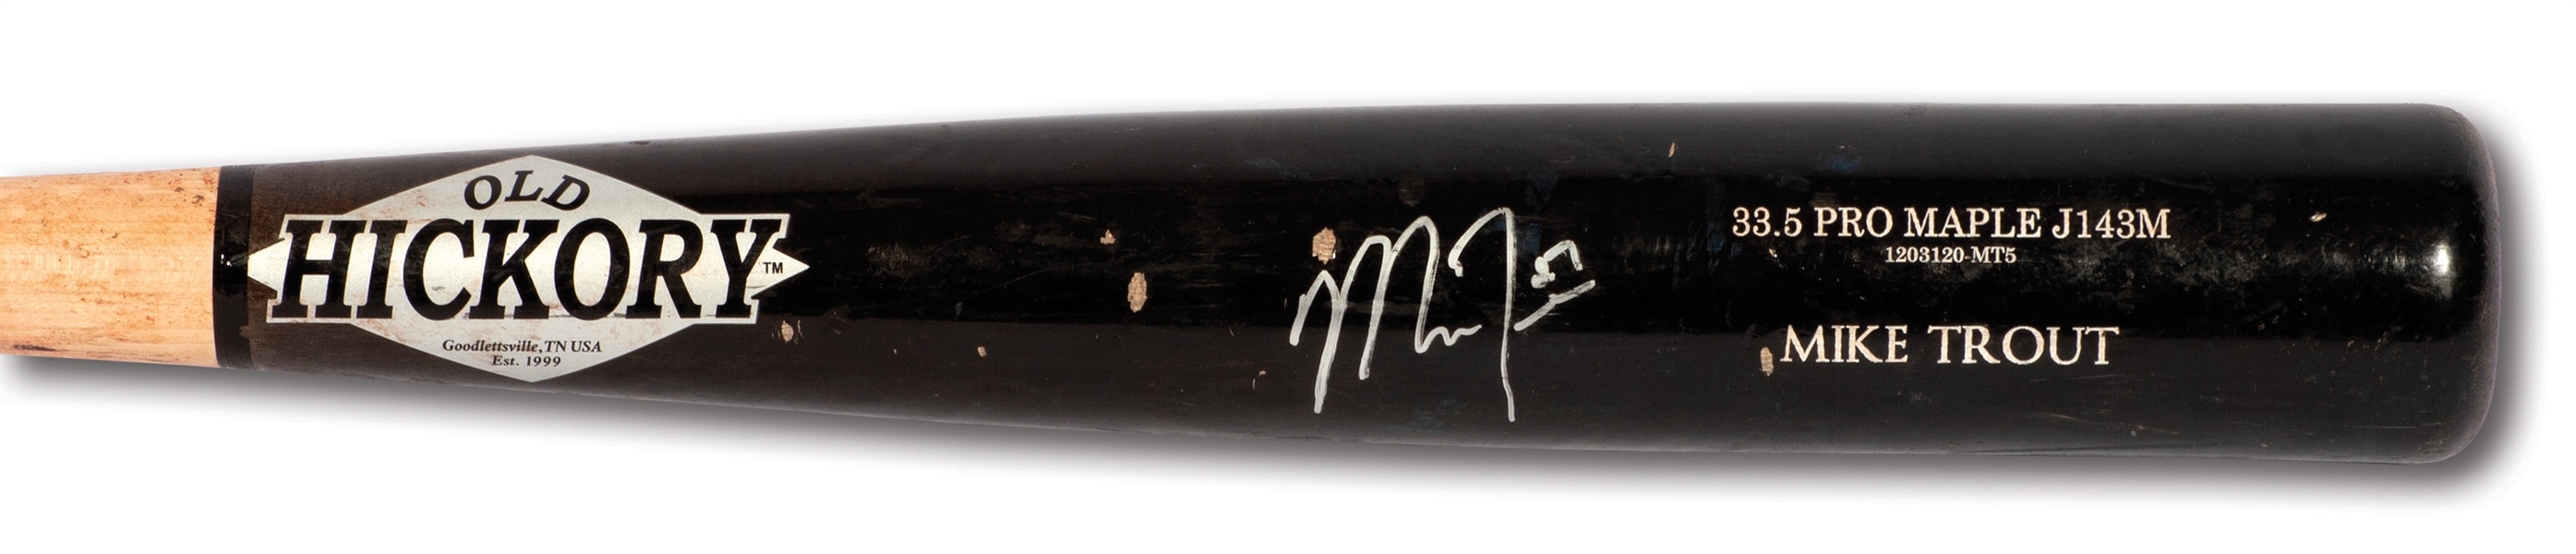 2012 MIKE TROUT SIGNED OLD HICKORY PRO MODEL J143M GAME USED BAT FROM A.L. ROOKIE OF THE YEAR SEASON (PSA/DNA GU 10)